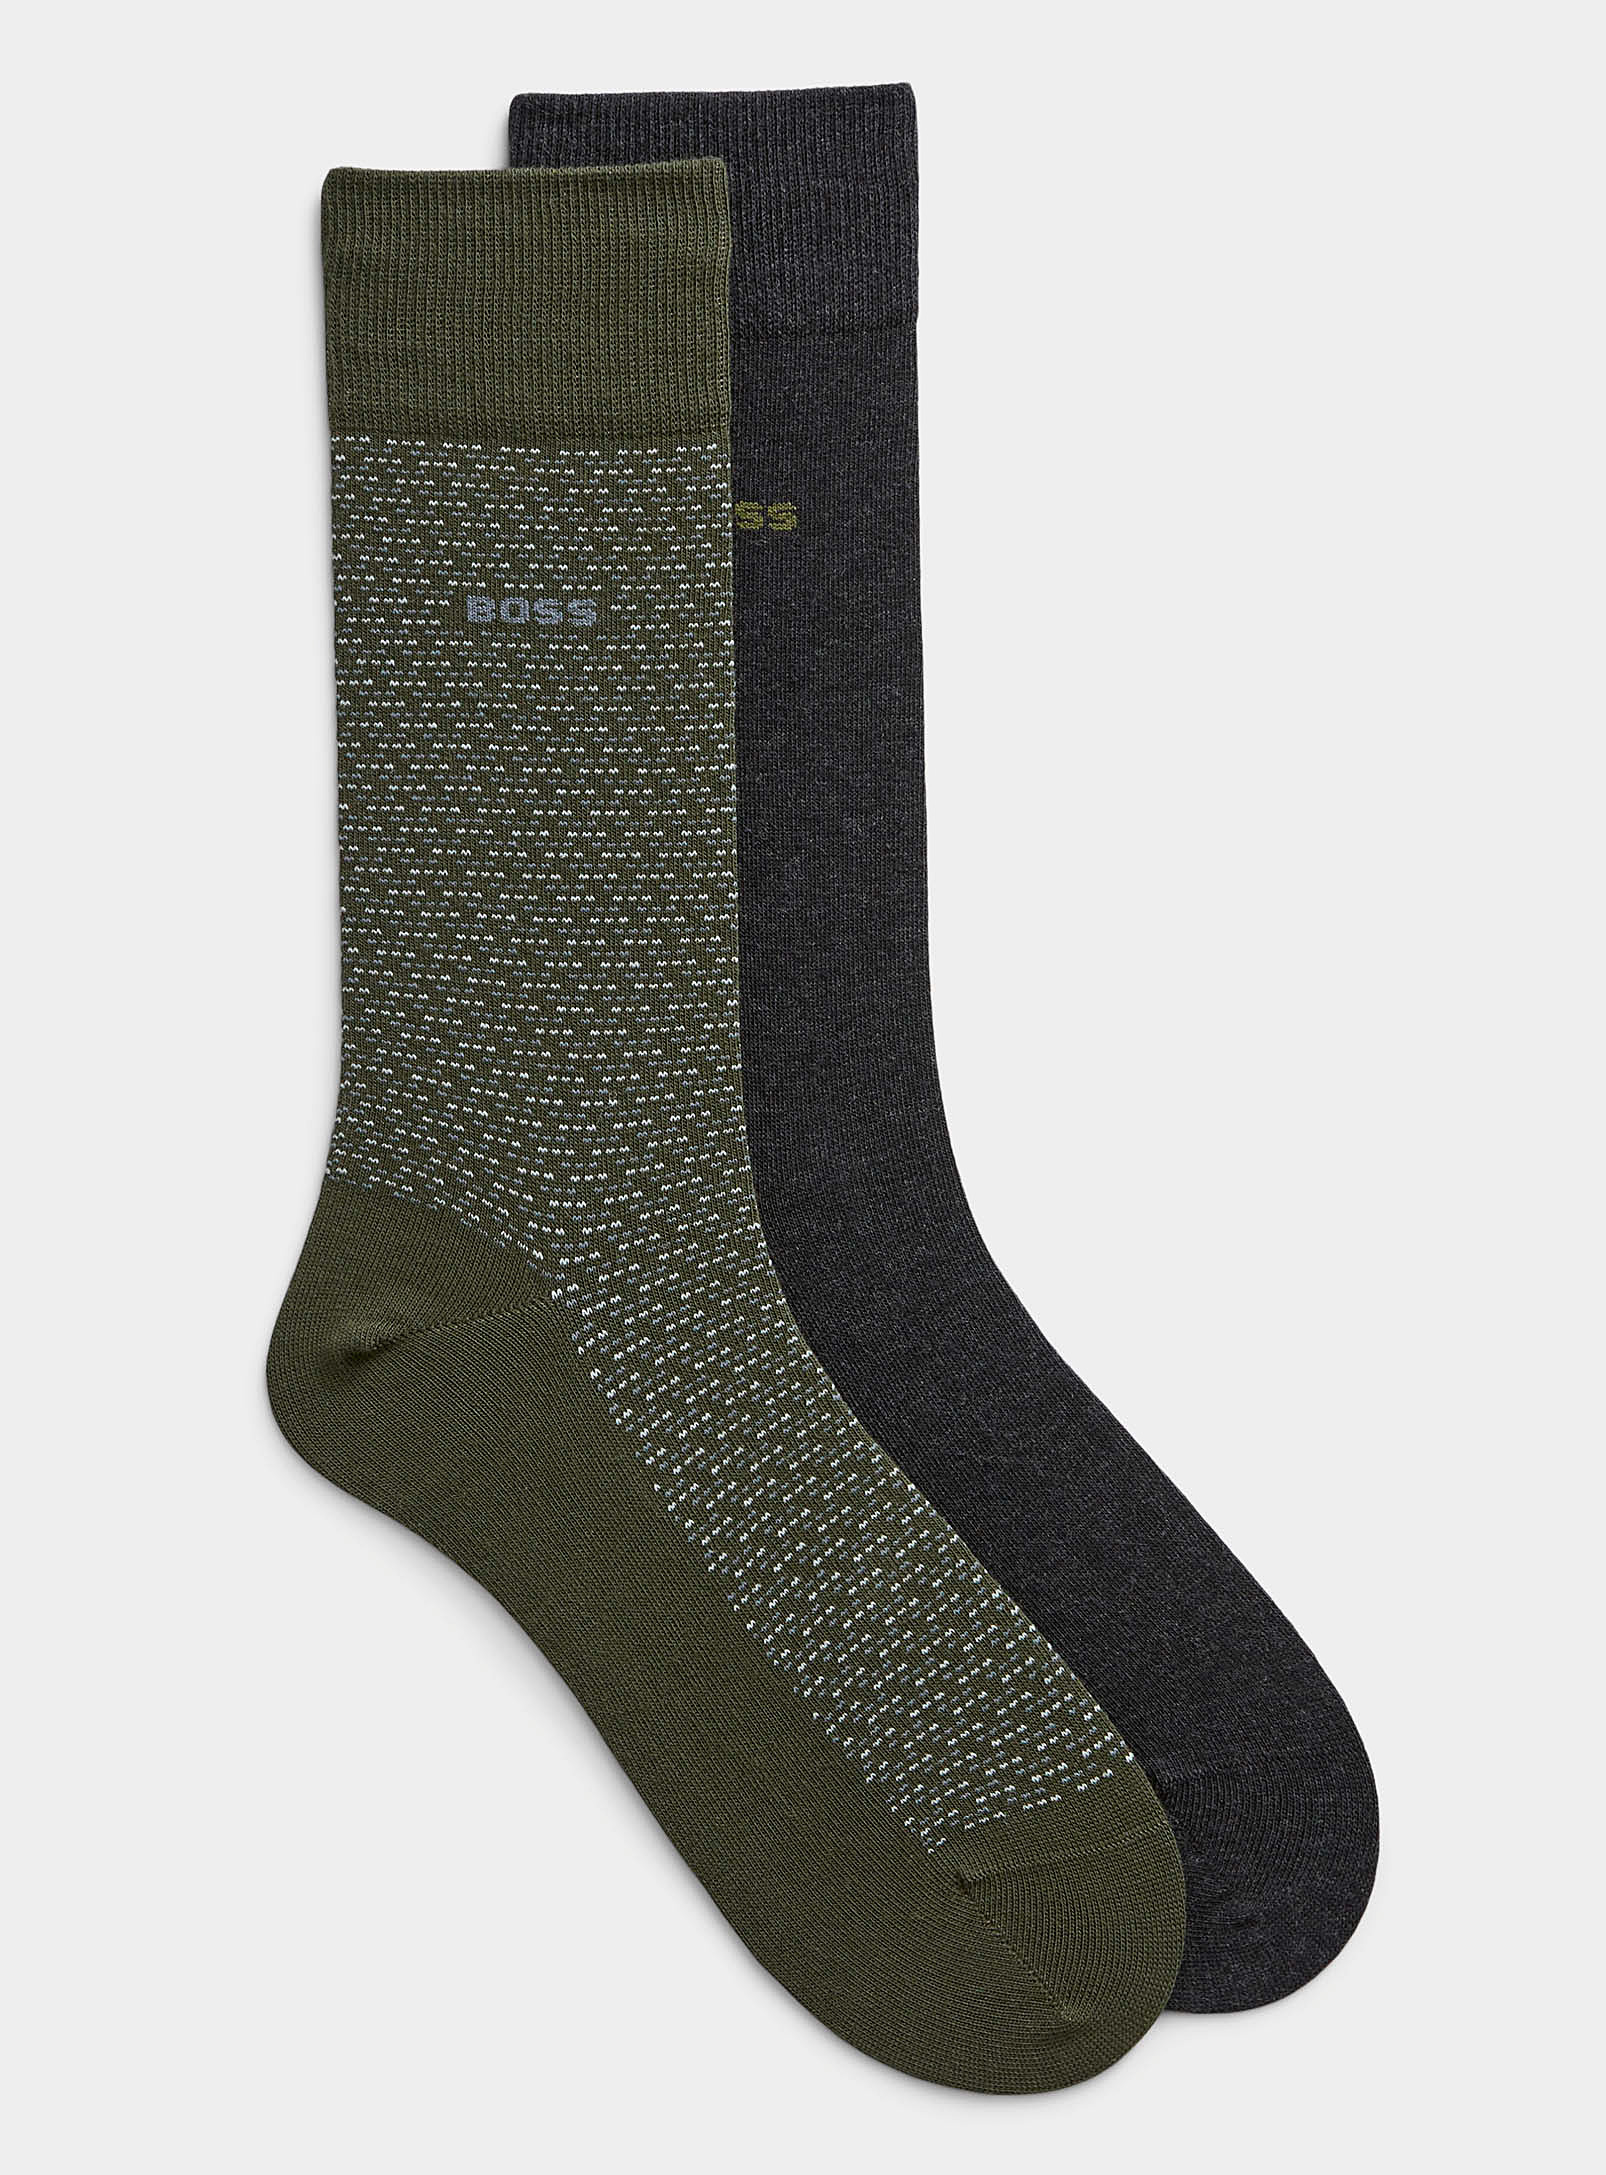 Hugo Boss Solid And Flecked Socks 2-pack In Green